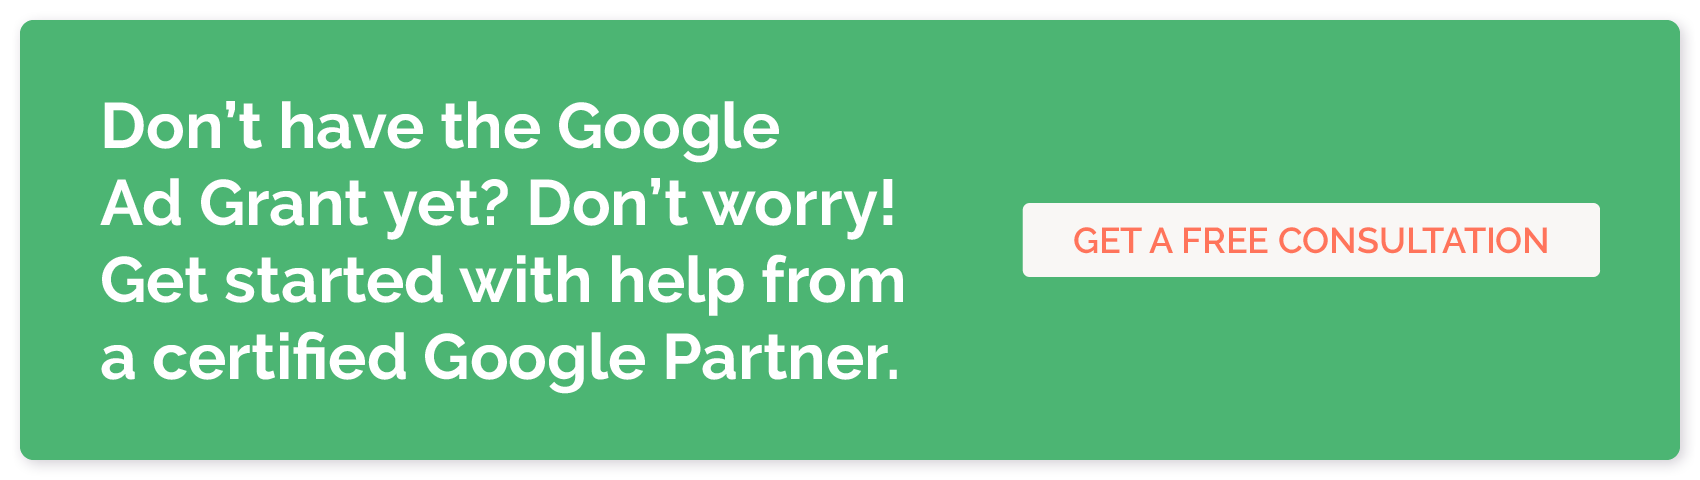 Get a free consultation from Getting Attention, a Google Ad Grants agency that can help your nonprofit measure its Google Ad Grants success.